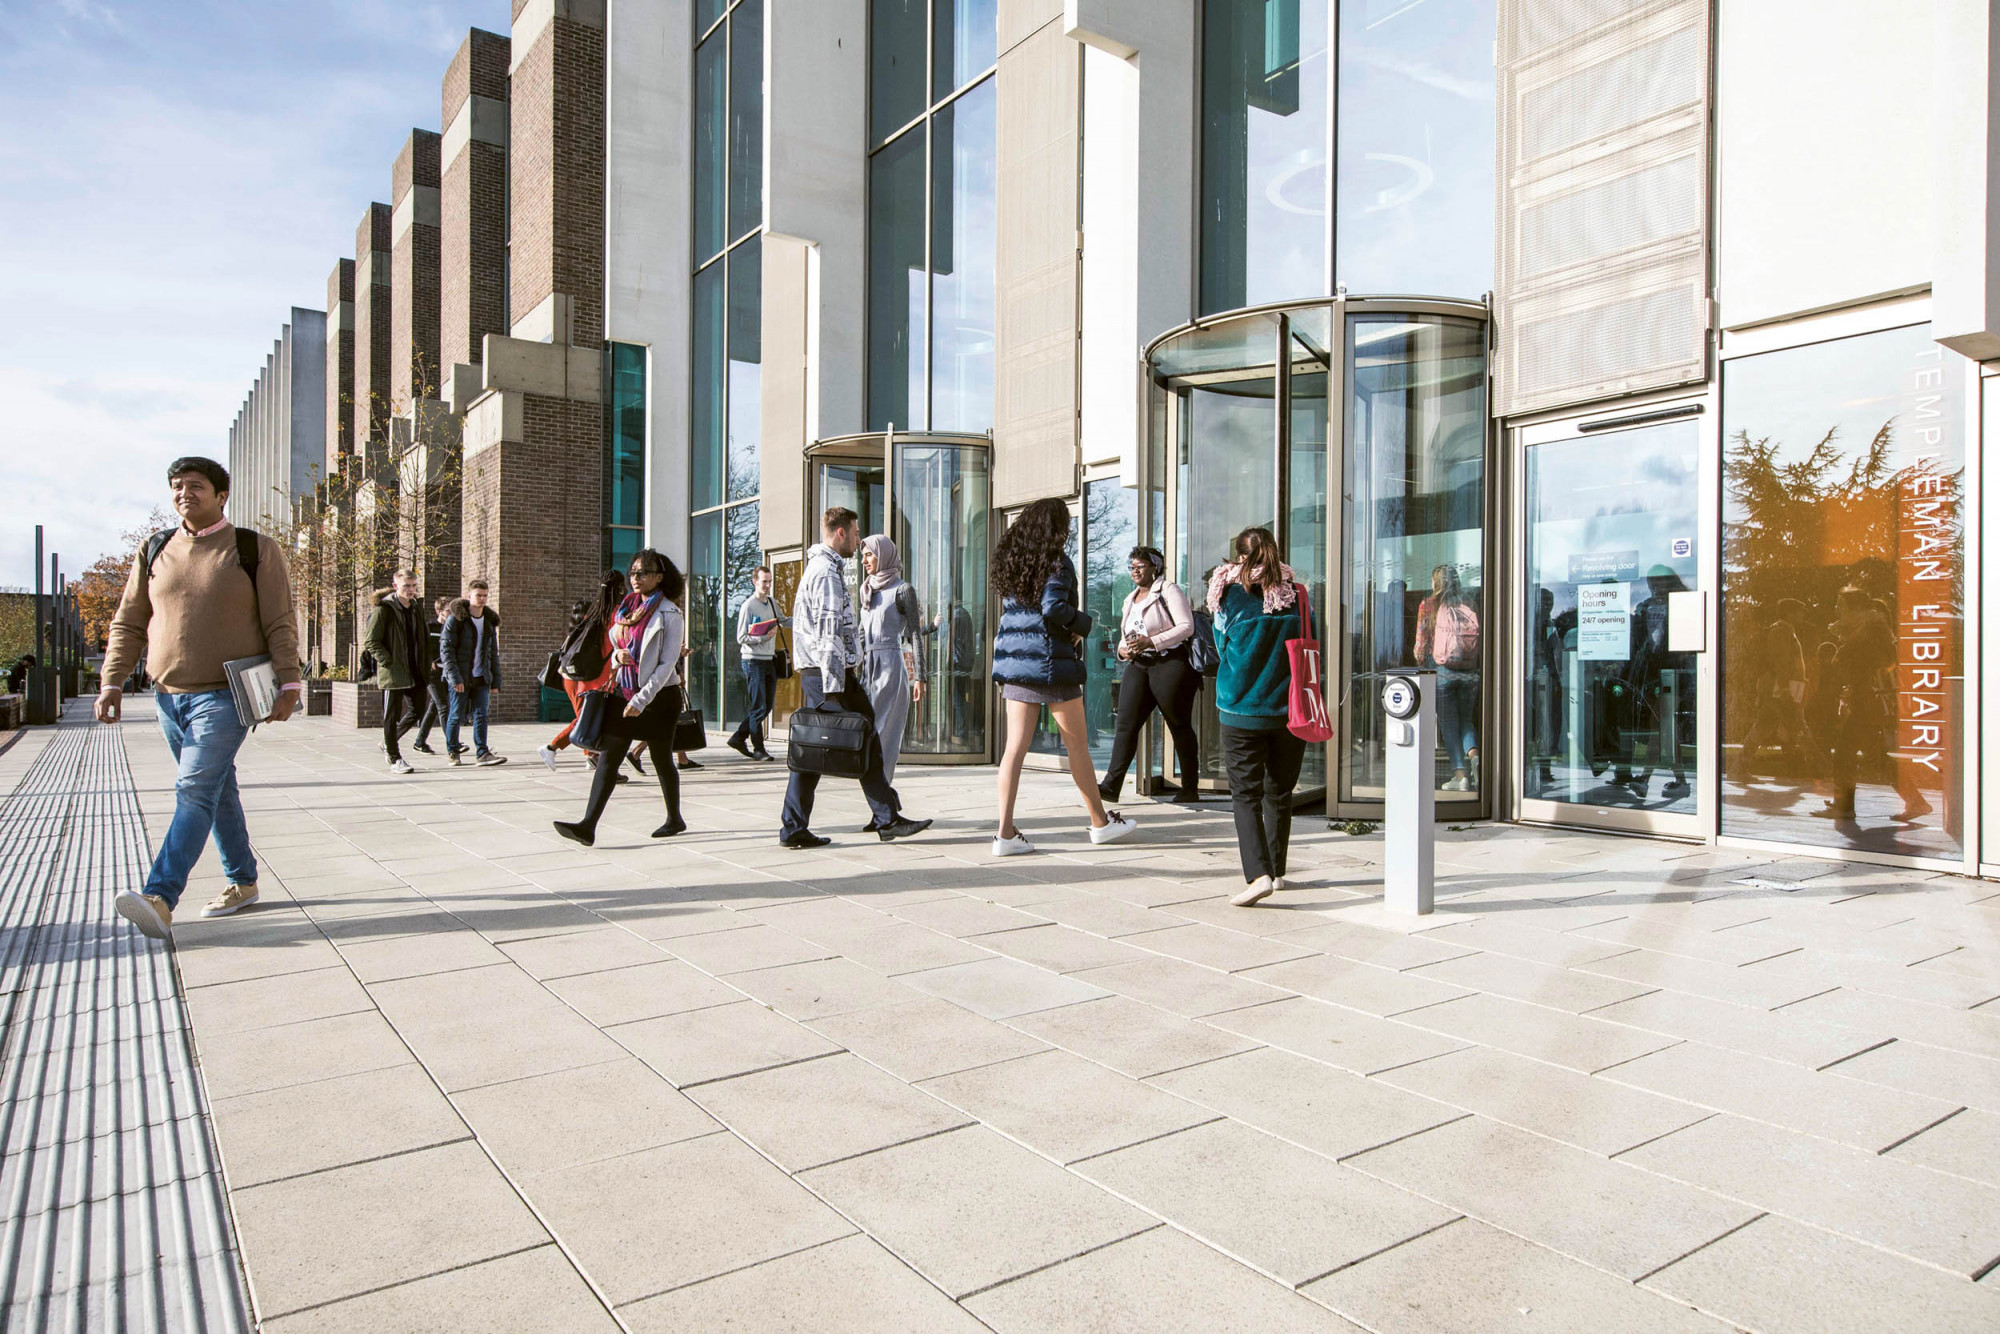 Student life outside Templeman Library